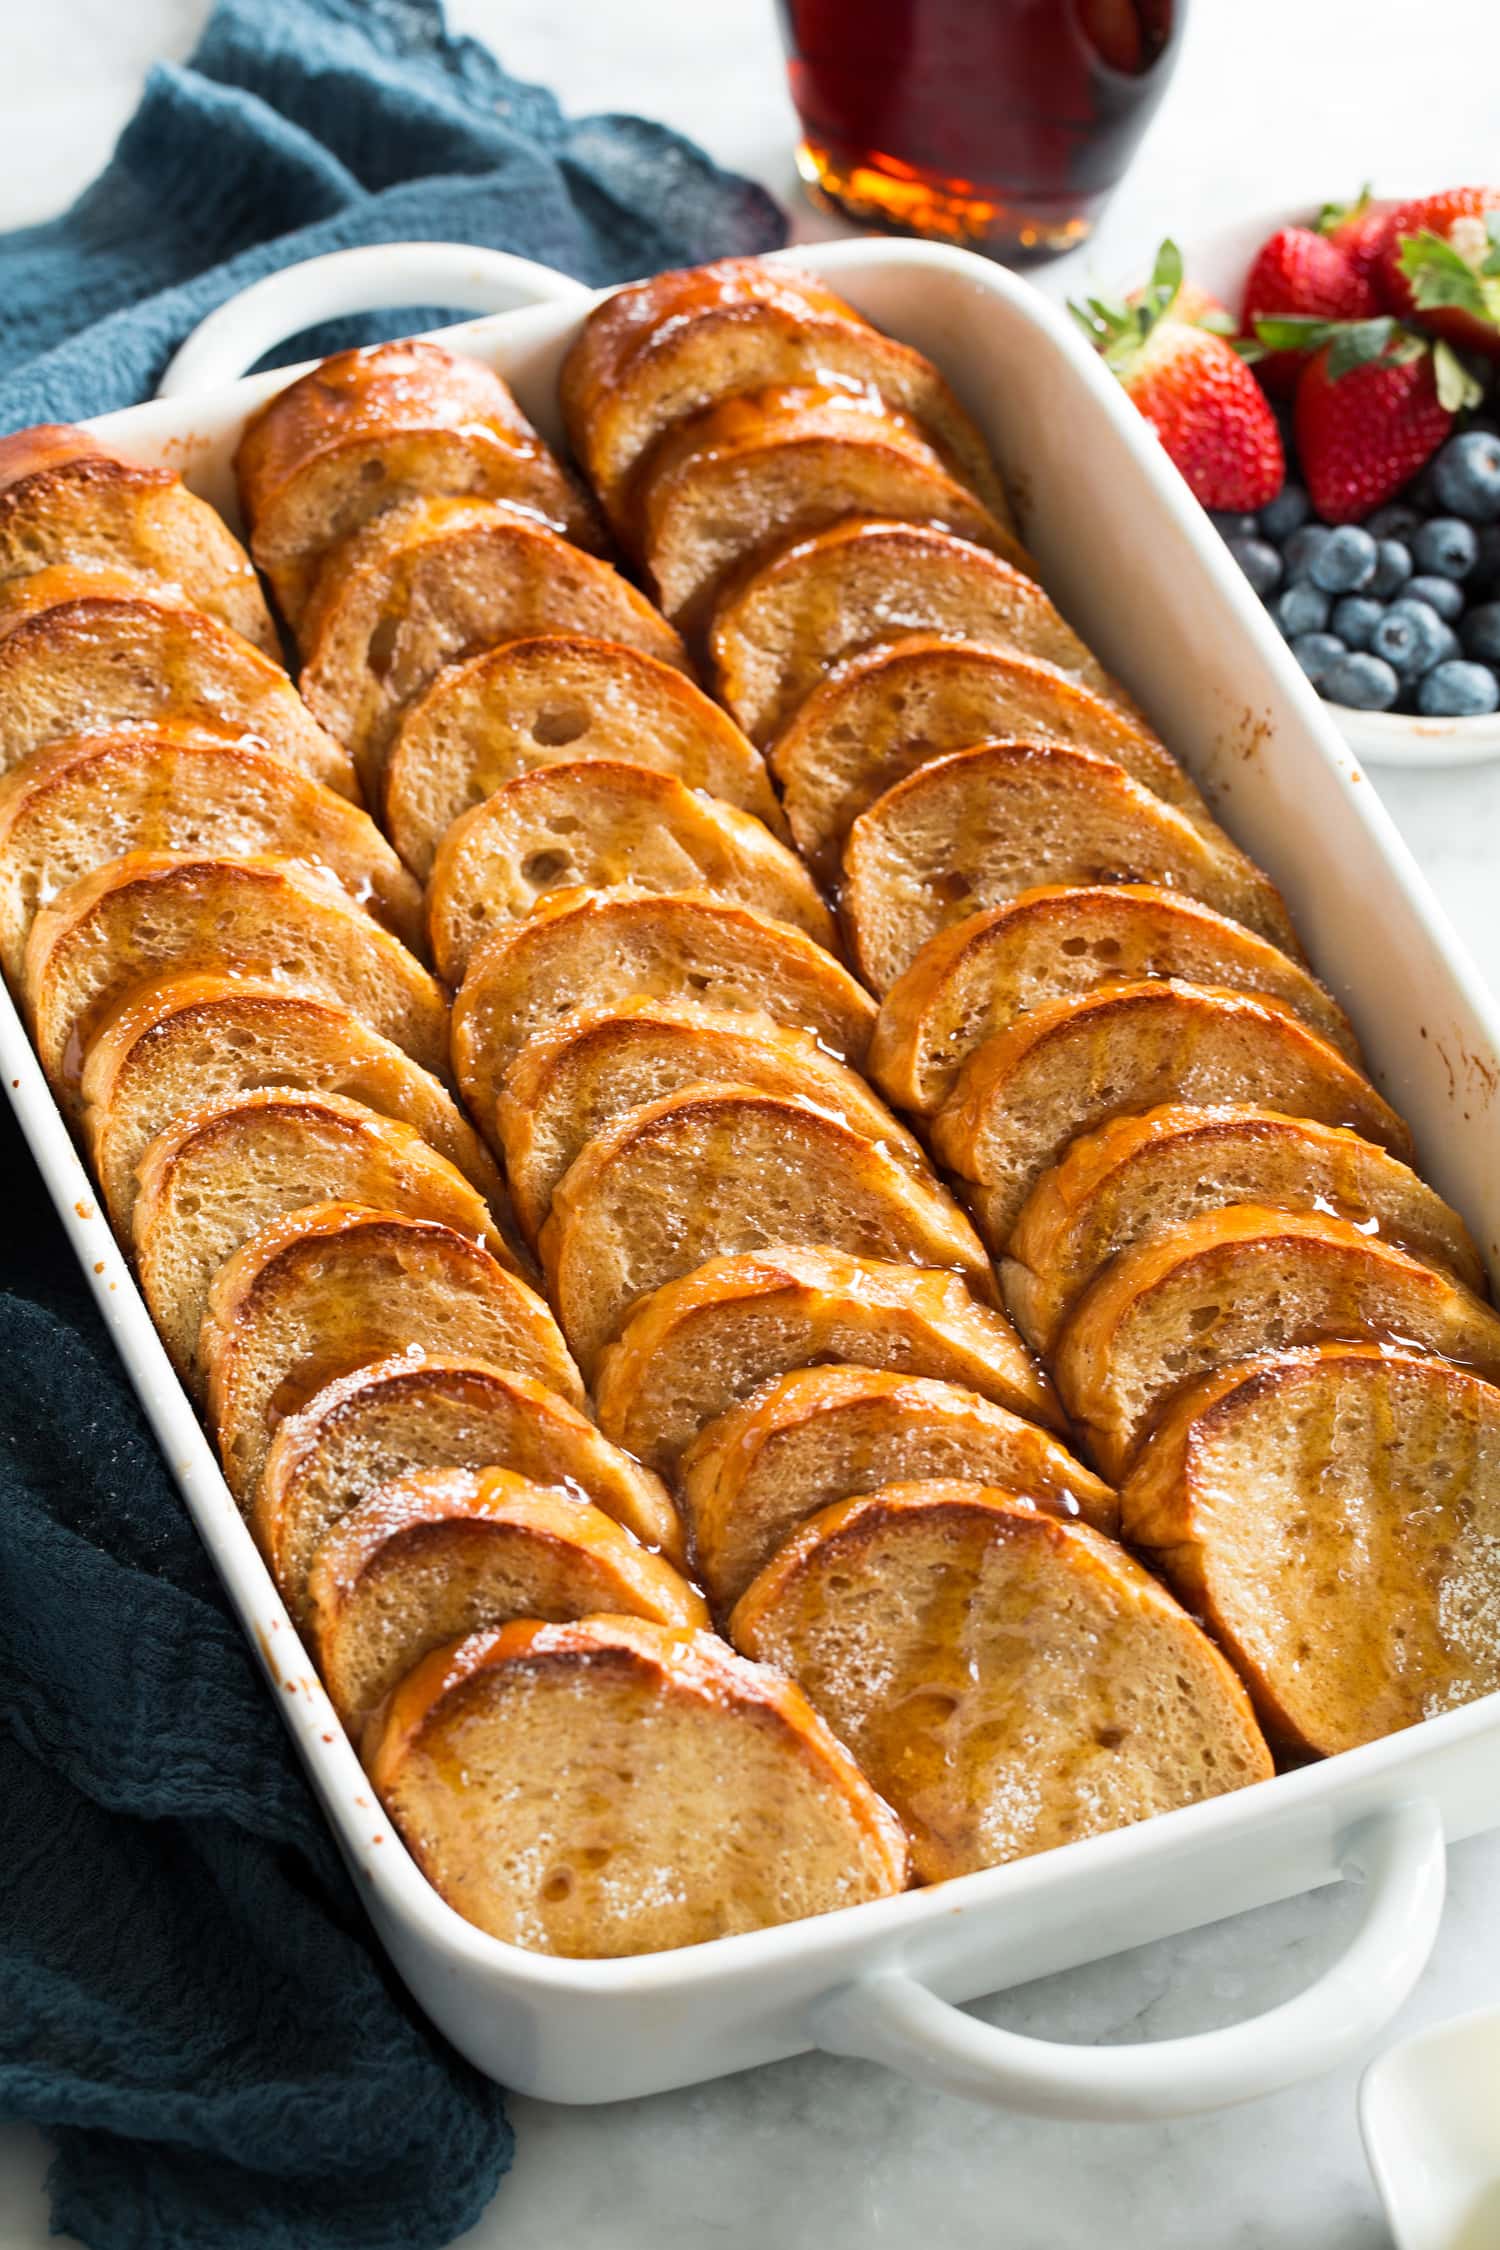 Baked french toast in a white baking dish.